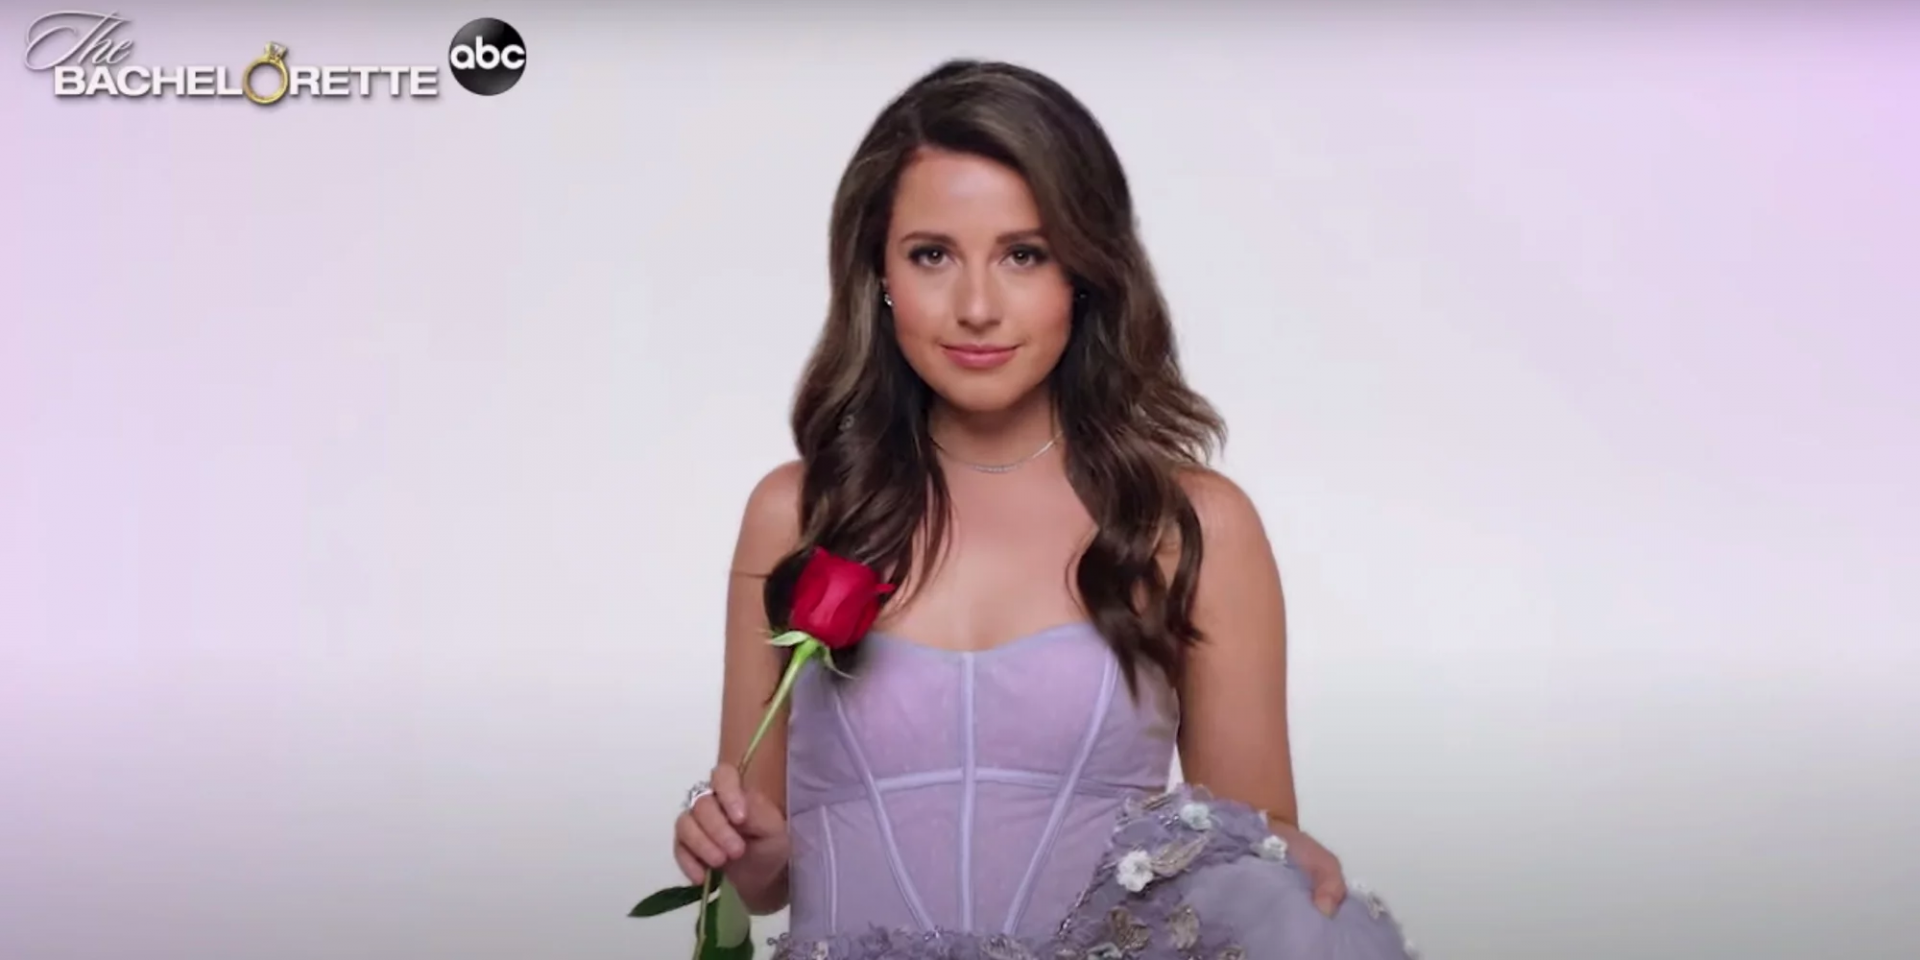 The Bachelorette 2021: Premiere Date, Katie Thurston's Cast, Location and Updated News